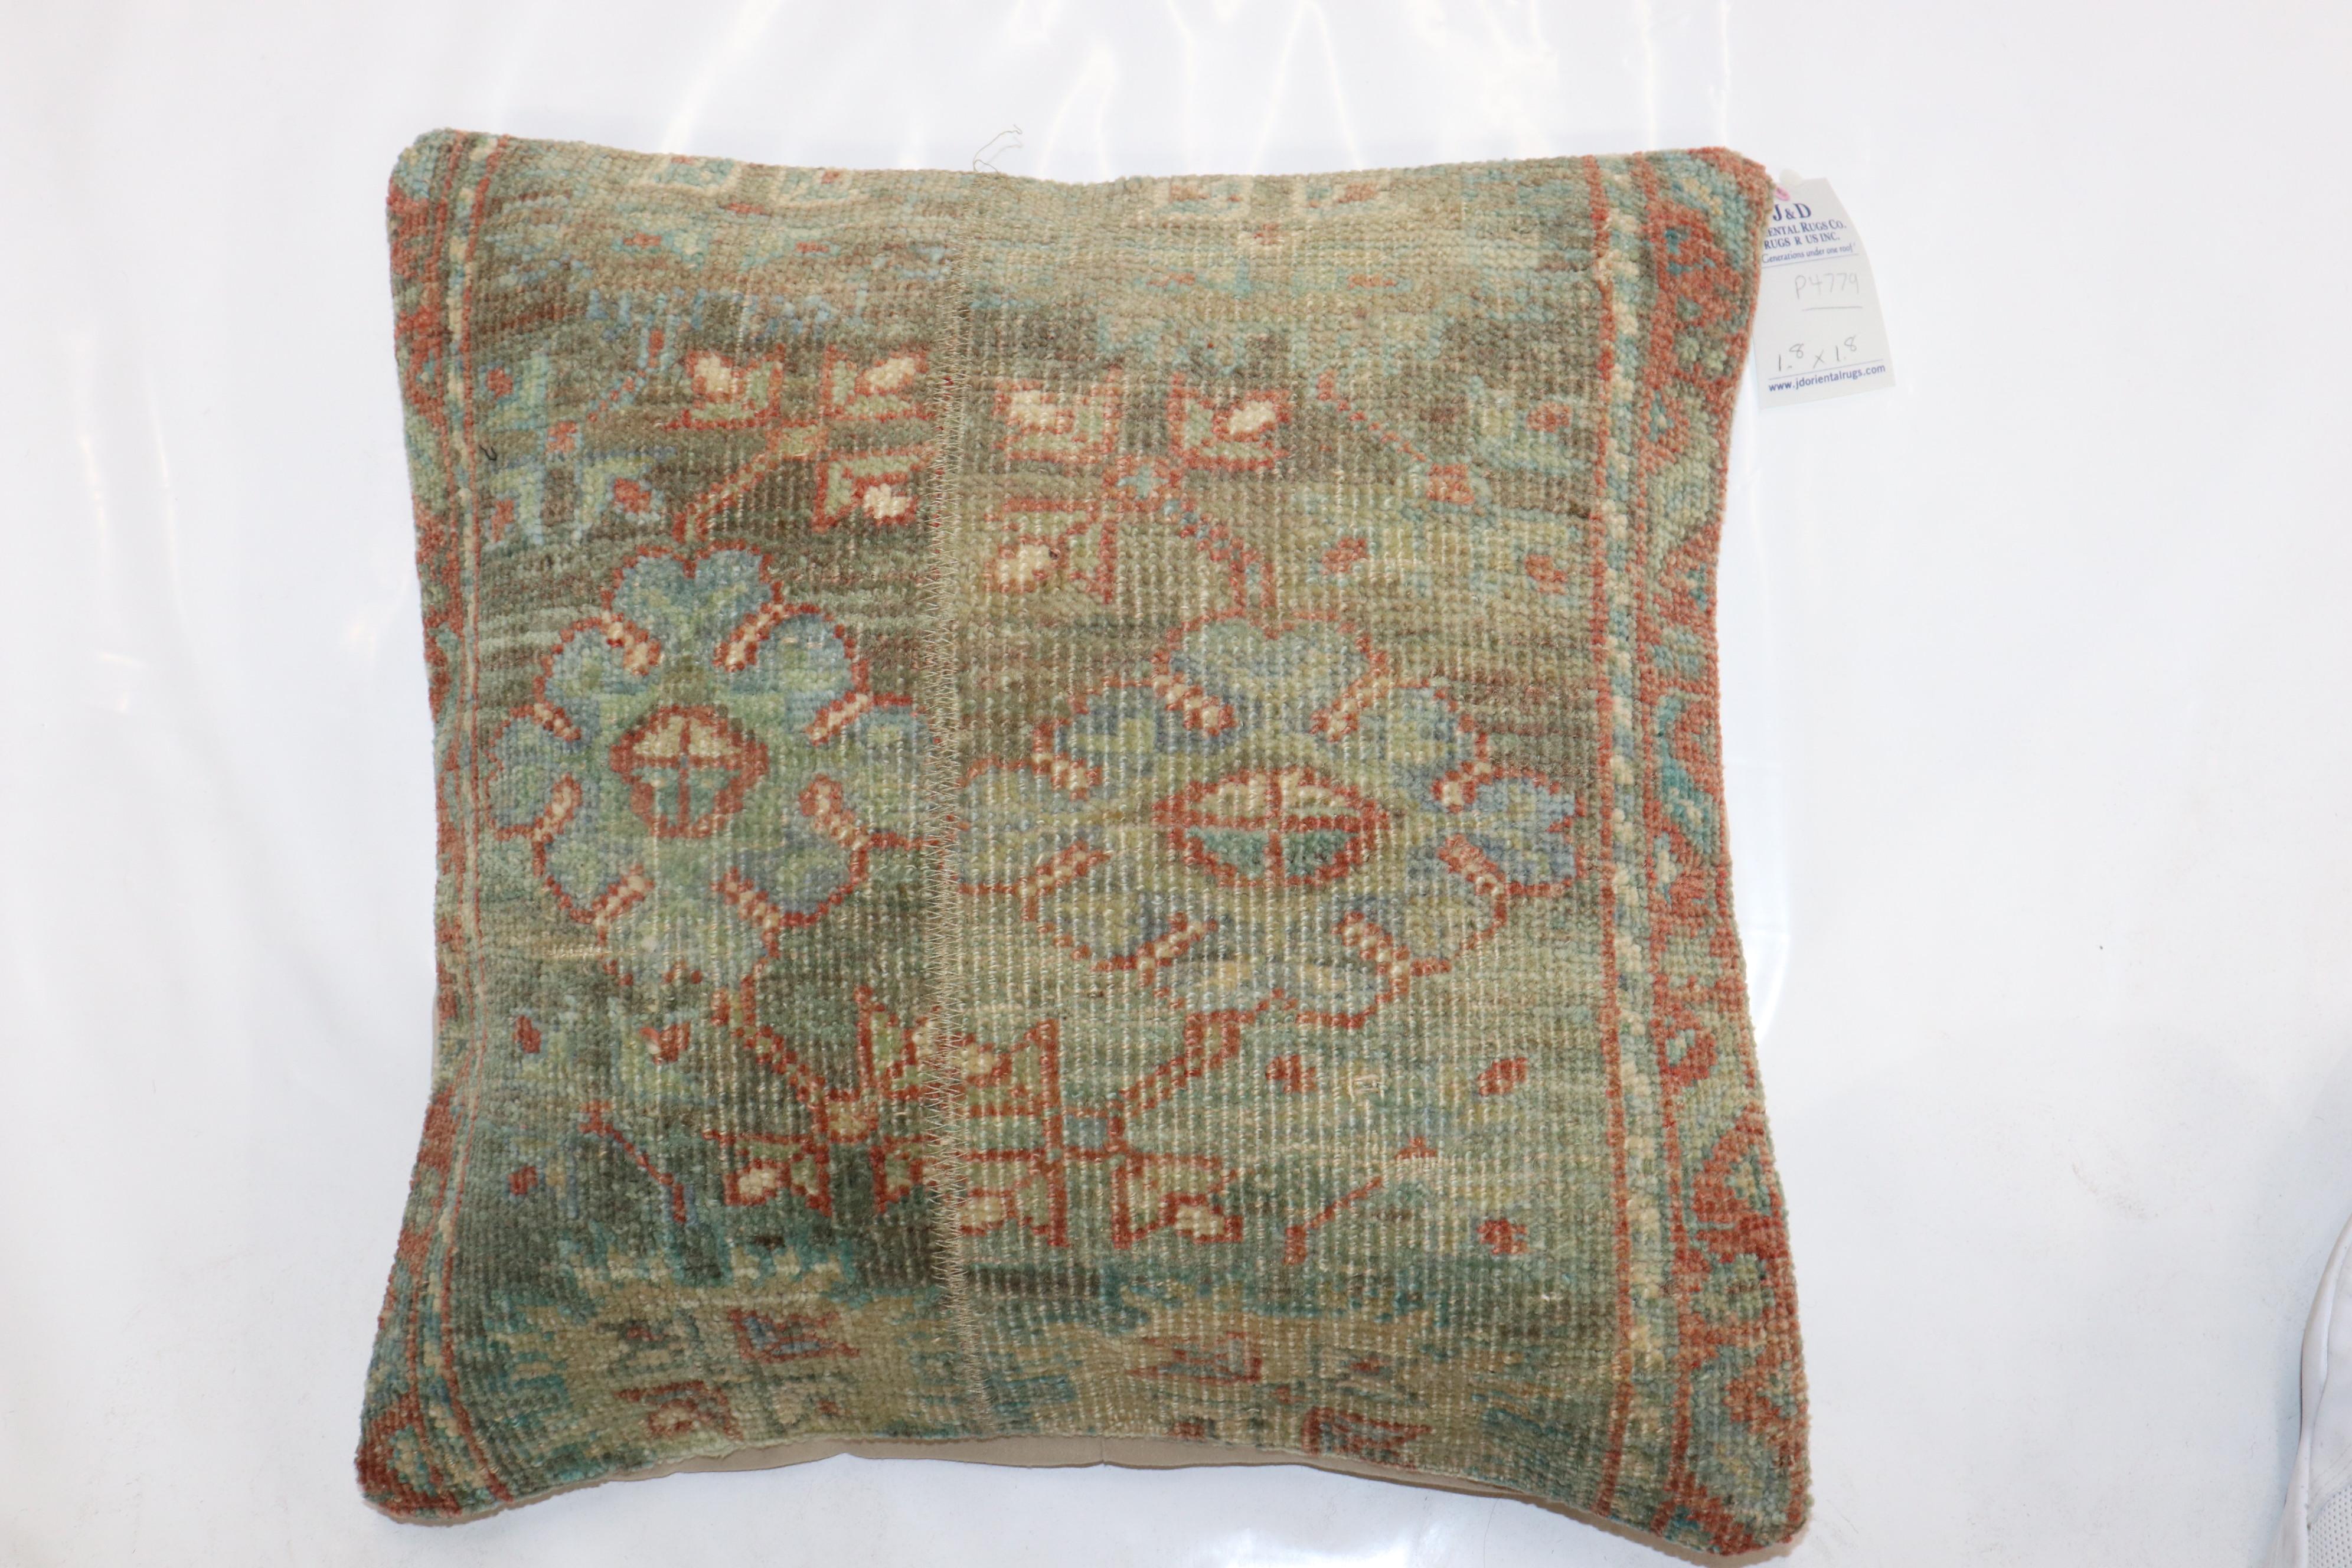 Pillow made from an early 20th-century Persian rug.

Measures: 20'' x 20